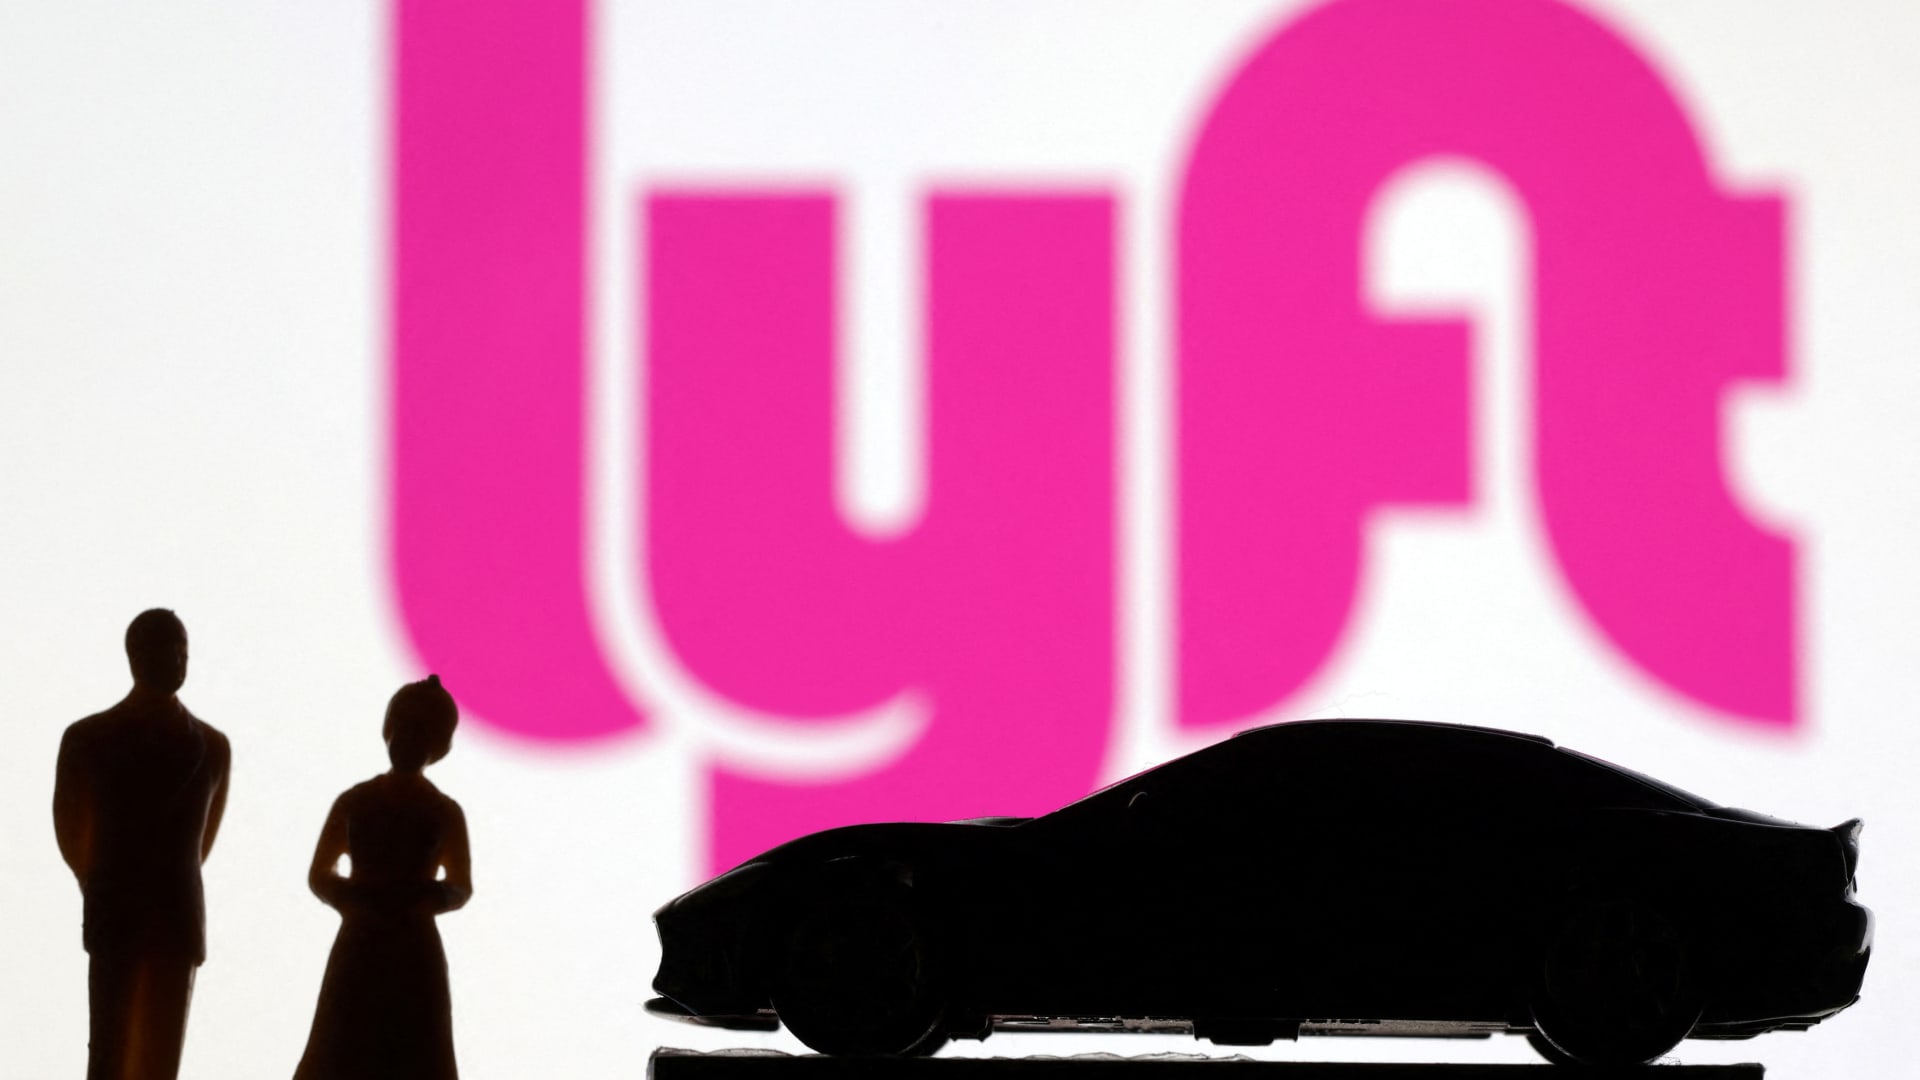 Lyft CEO will take blame for &#x27extra zero that slipped into&#x27 earnings launch